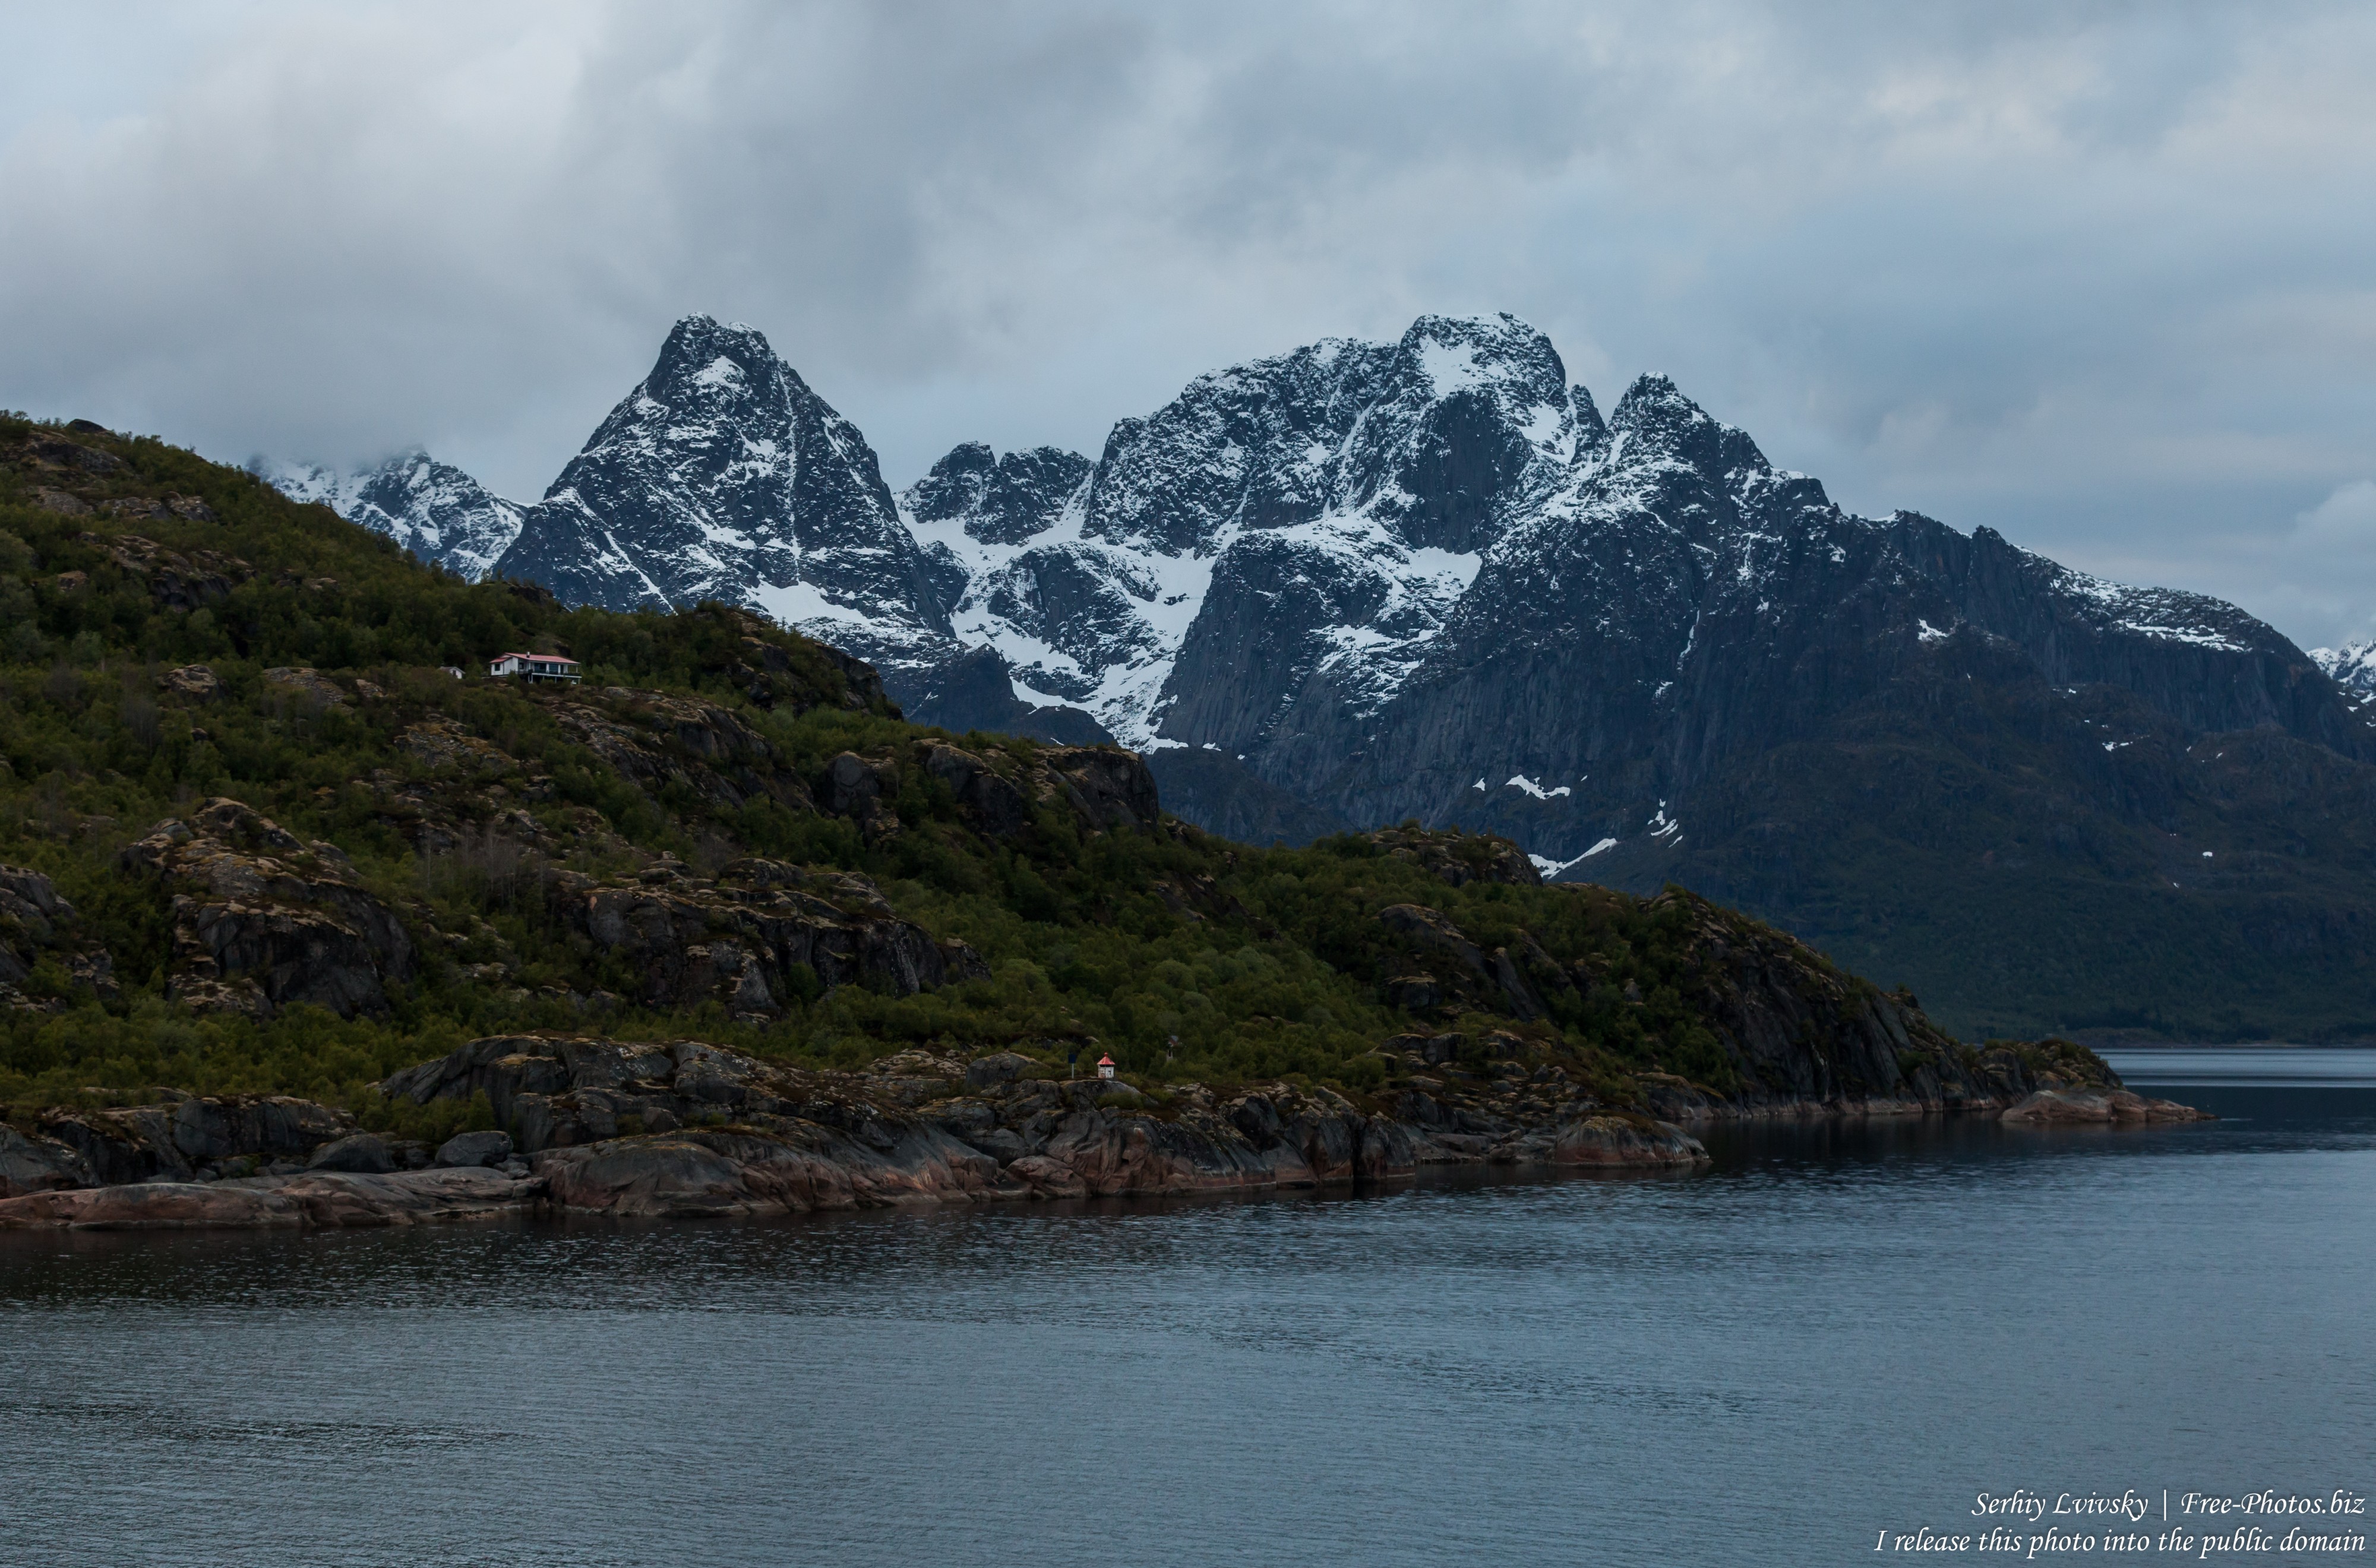 way from Svolvaer to Trollfjord, Norway, photographed in June 2018 by Serhiy Lvivsky, picture 8